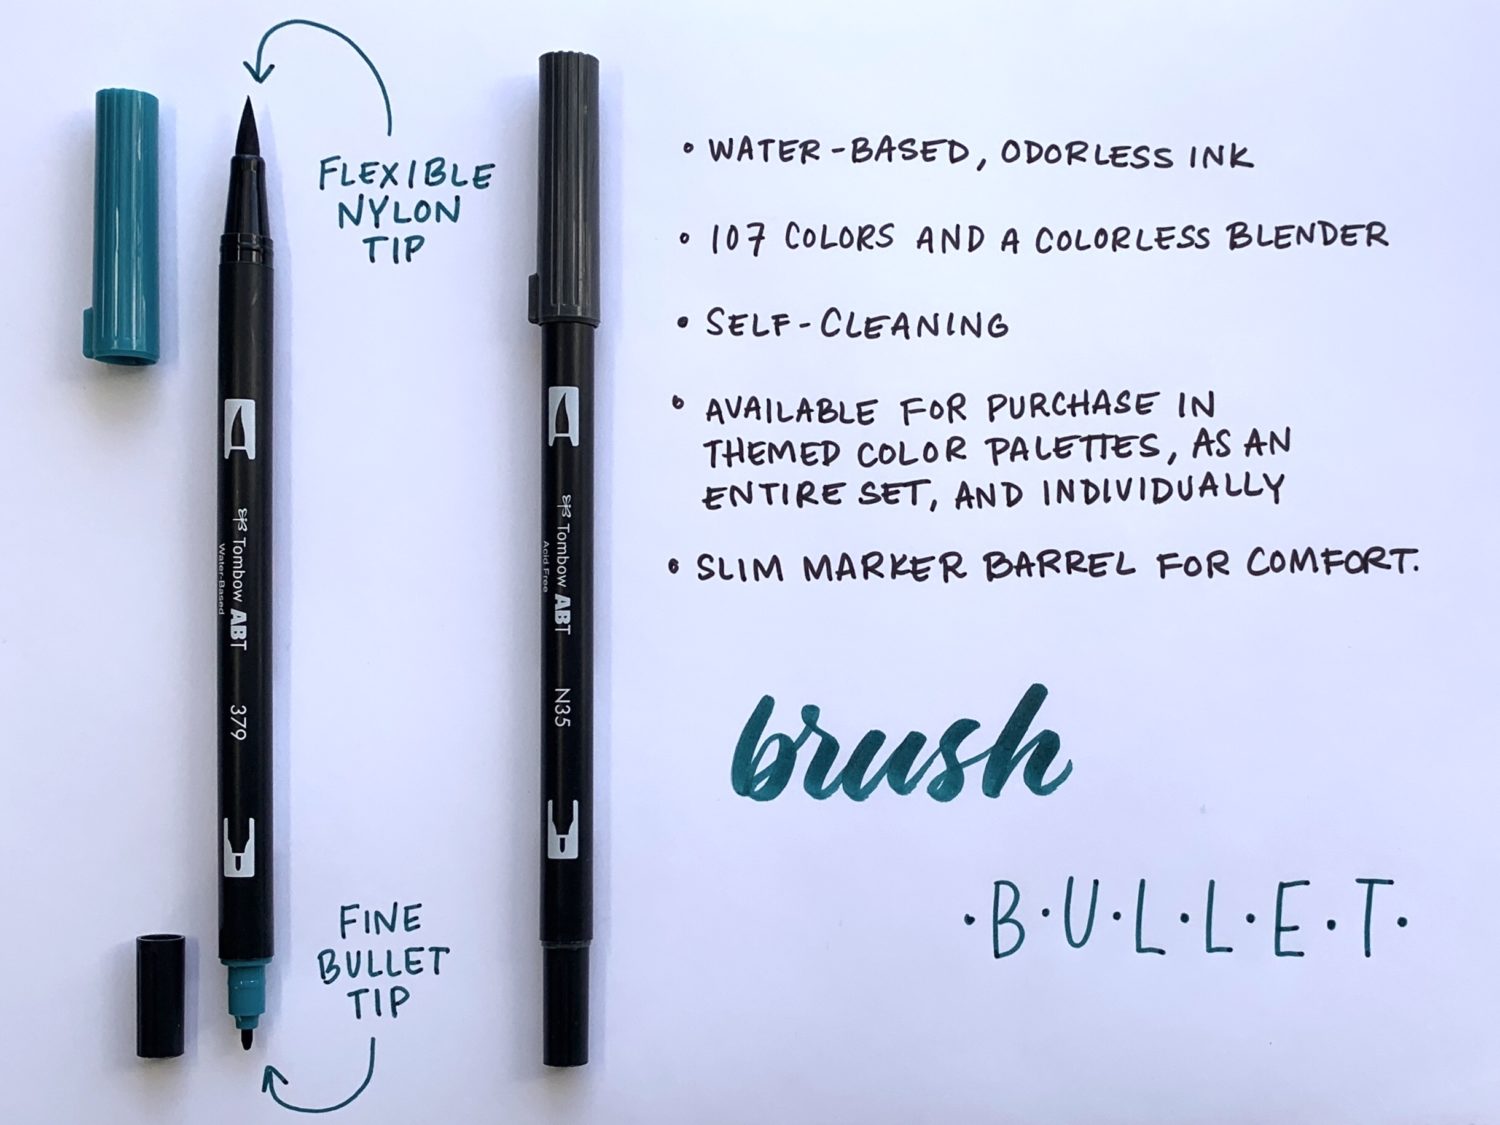 How can you use @TombowUSA Dual Brush Pens in your art work? Learn how in this review by @LePereLetters! #dualbrushpens #brushmarkers #tombow